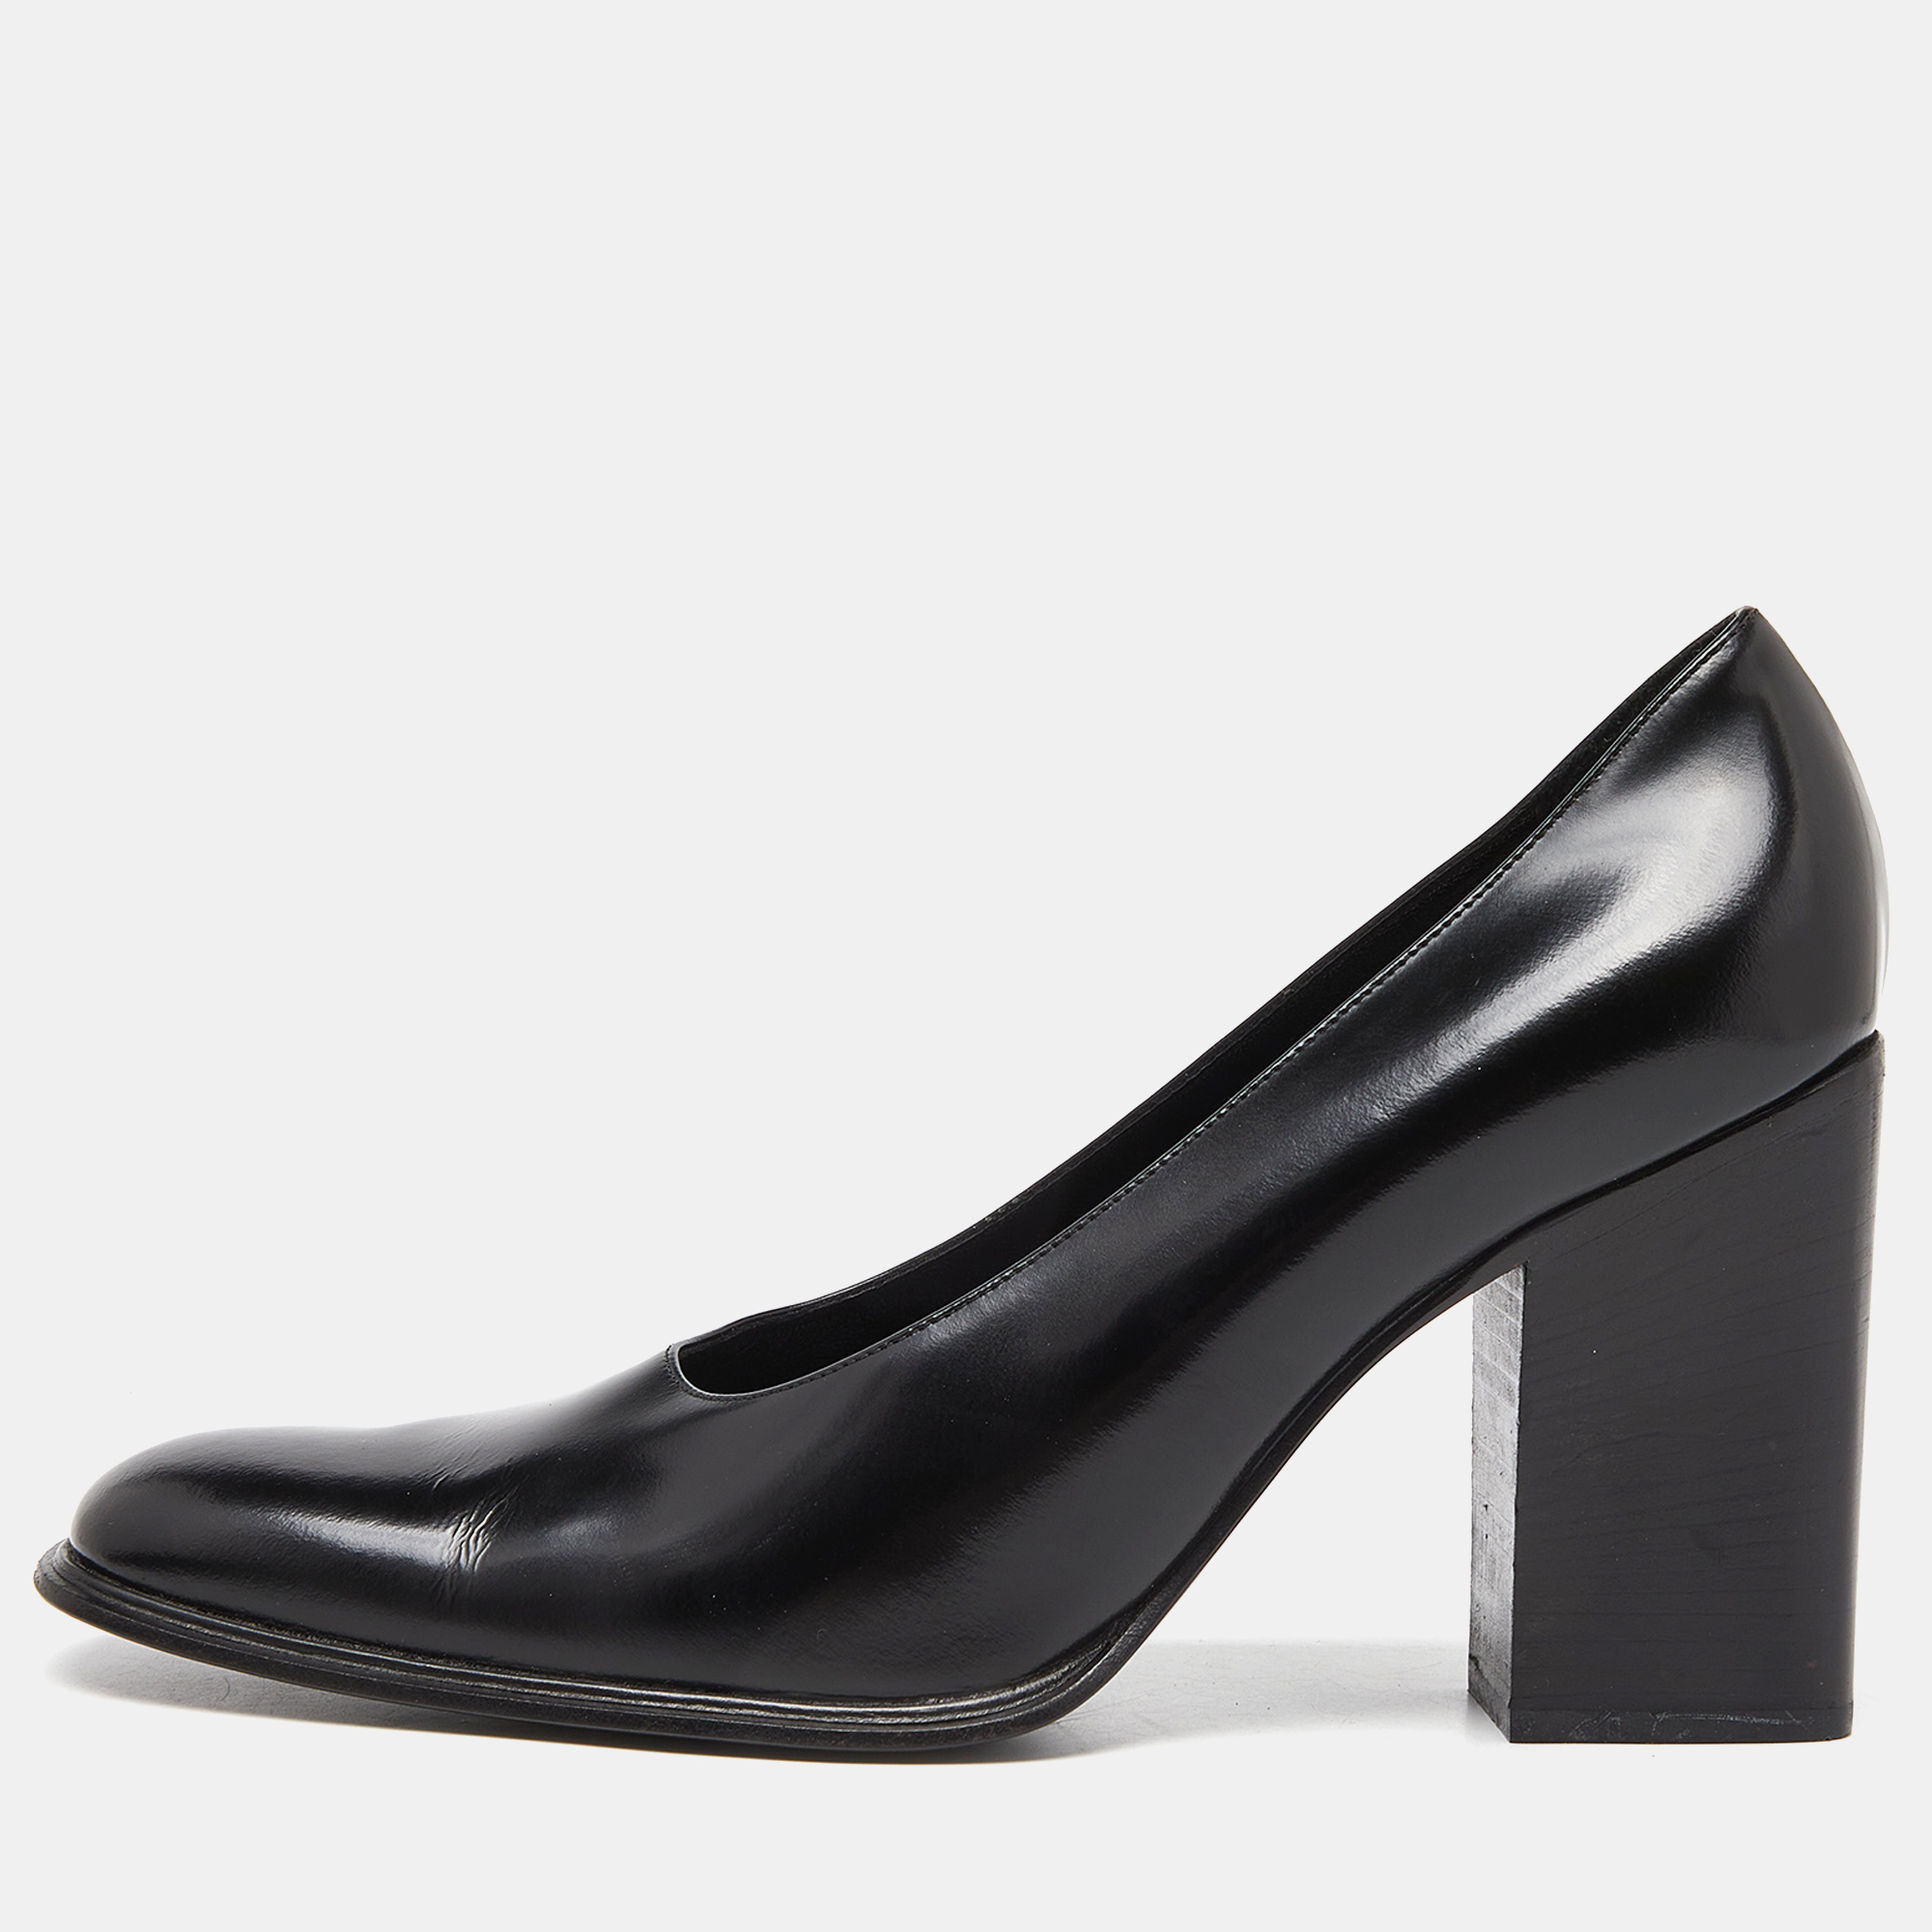 Pre-owned Gucci Black Leather Block Heel Pumps Size 39.5